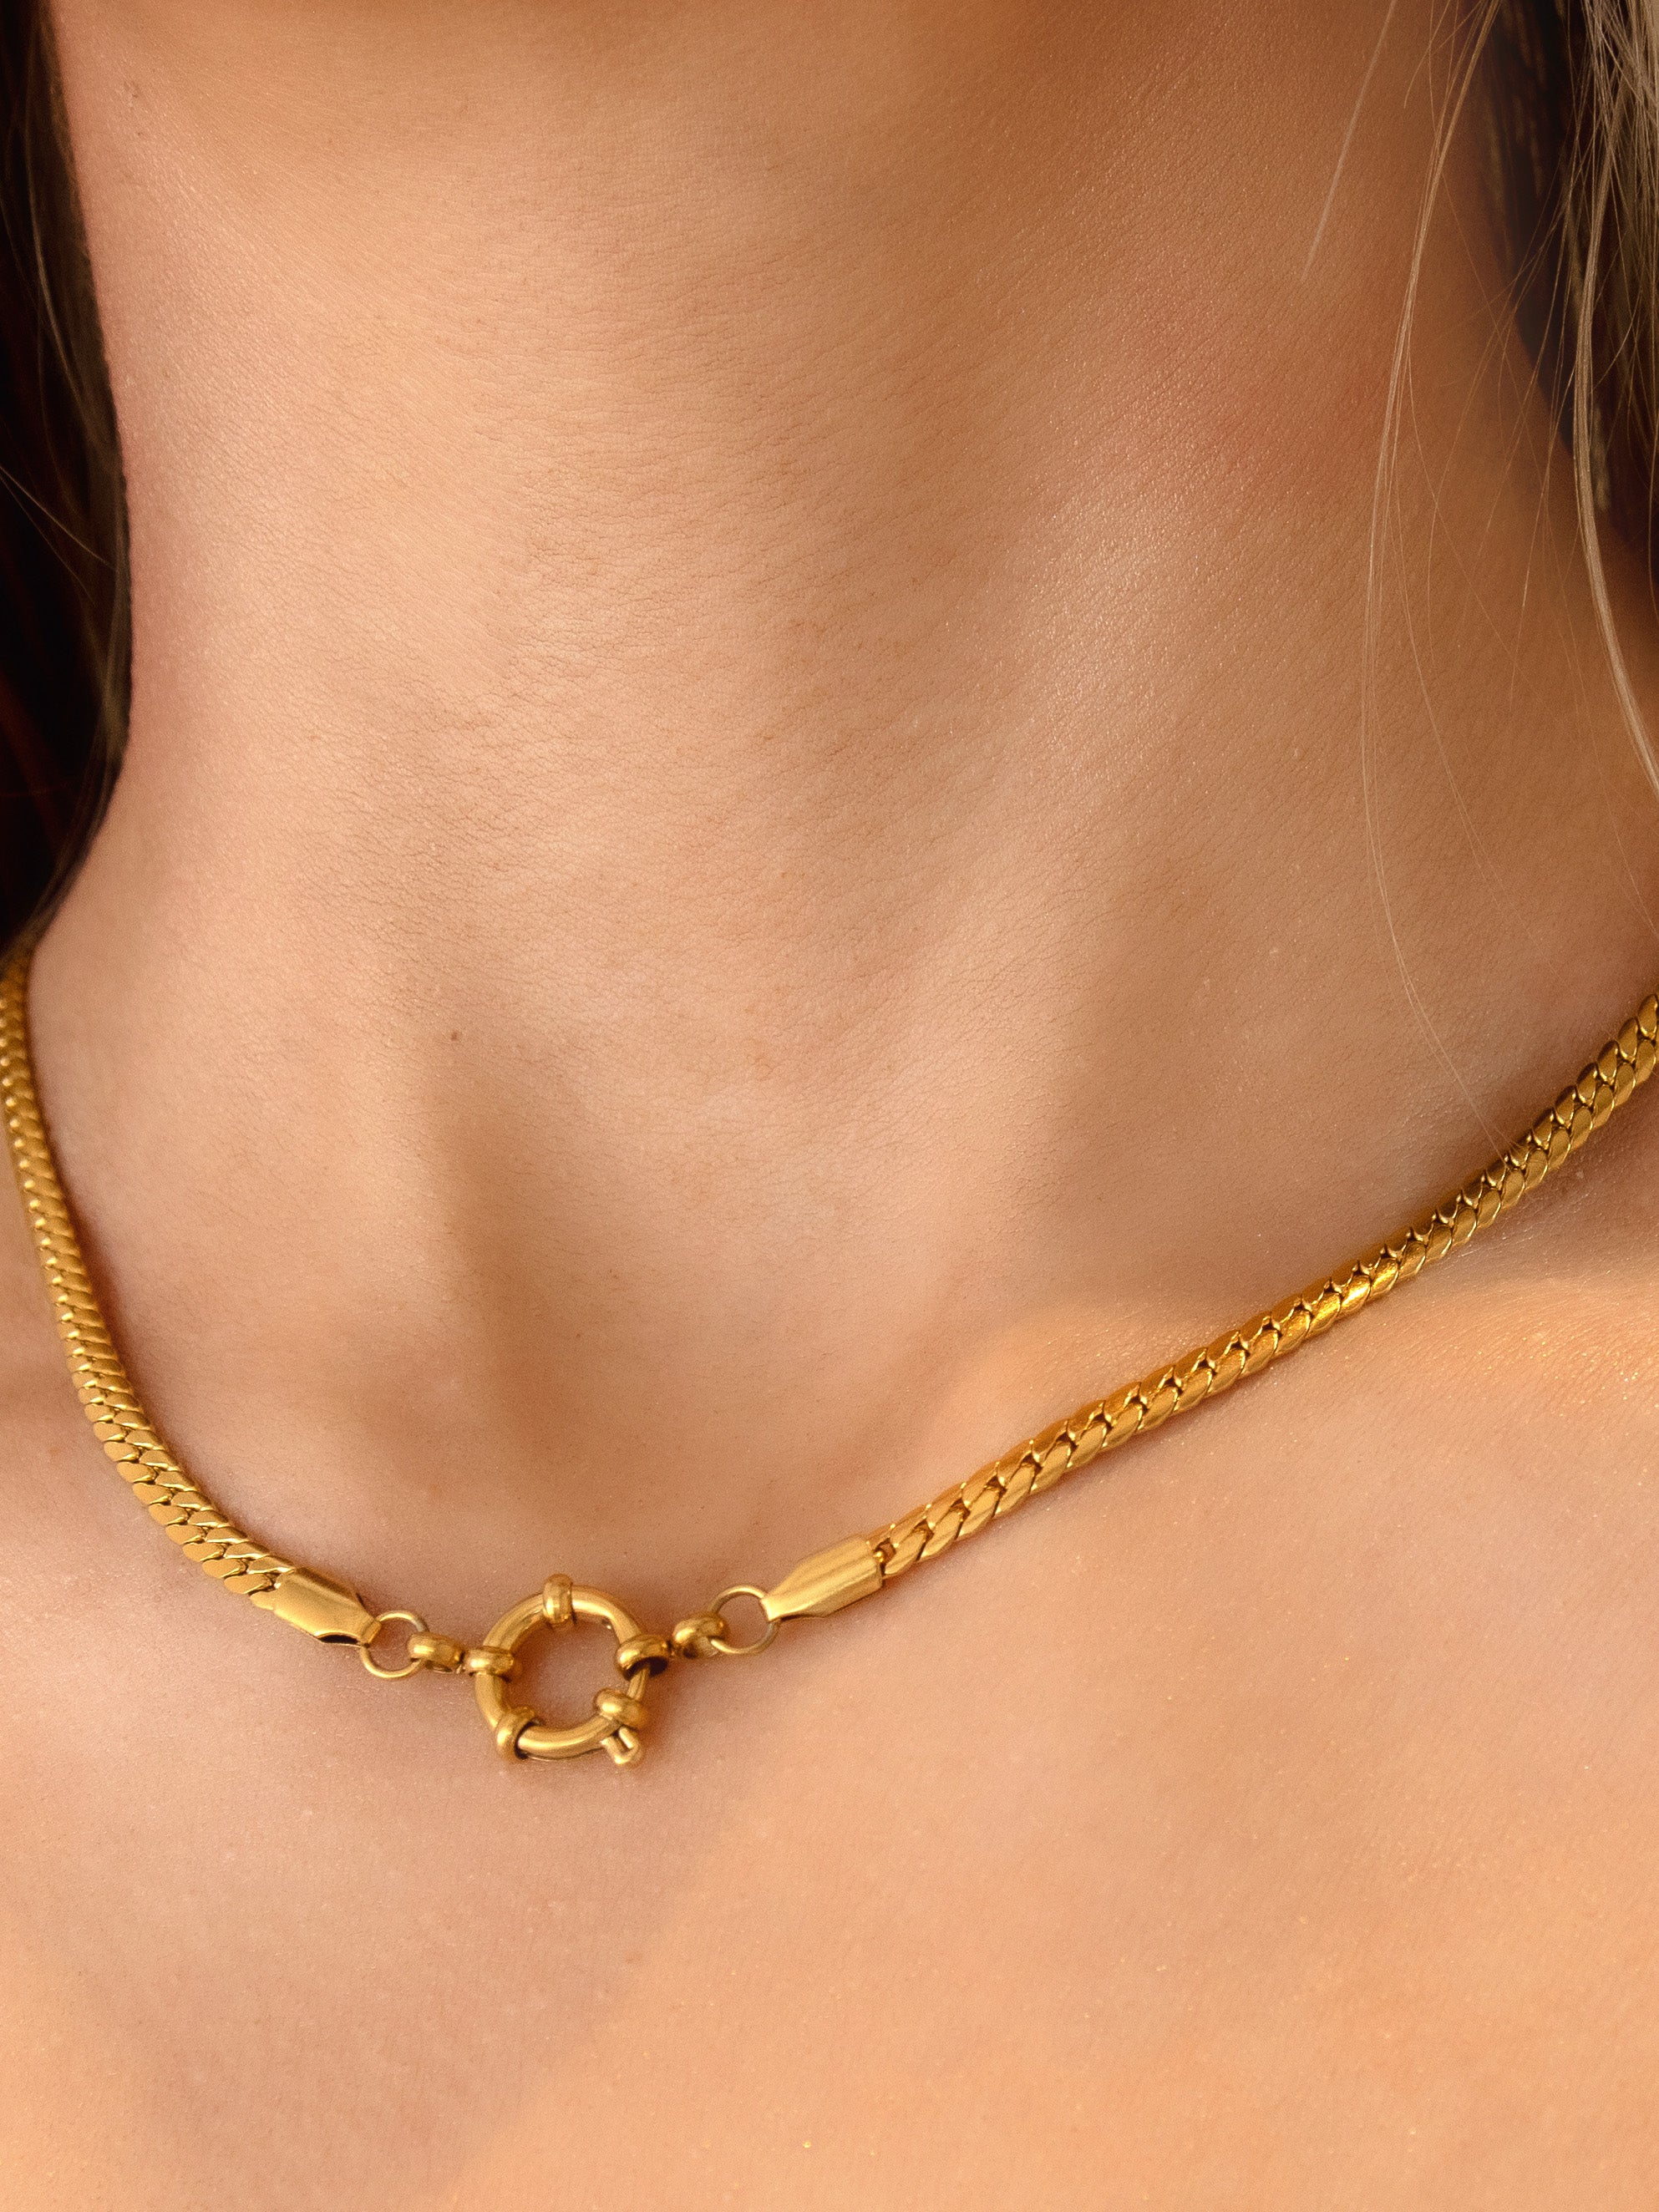 Gold Curb Chain Choker For Charms